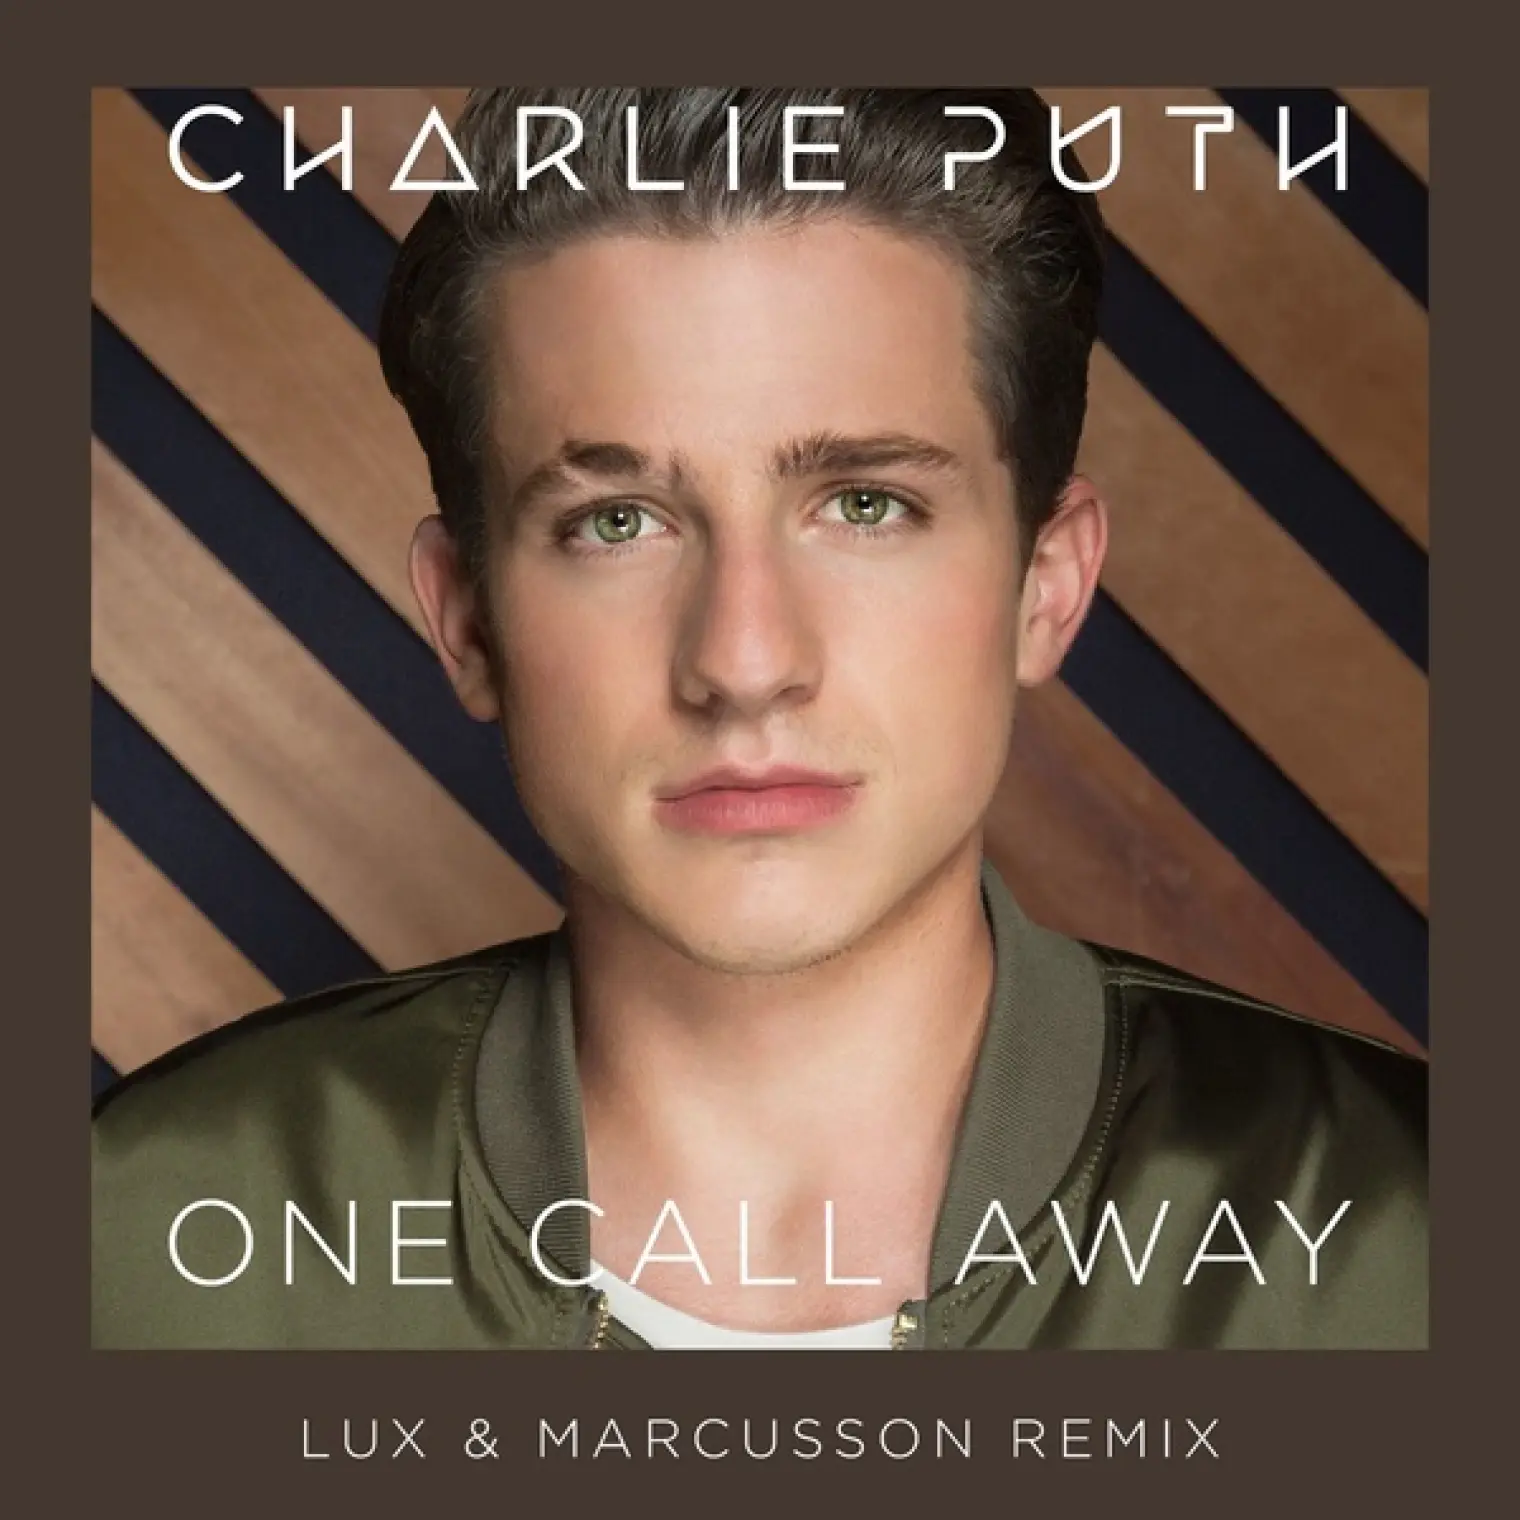 One Call Away (Lux & Marcusson Remix) -  Charlie Puth 